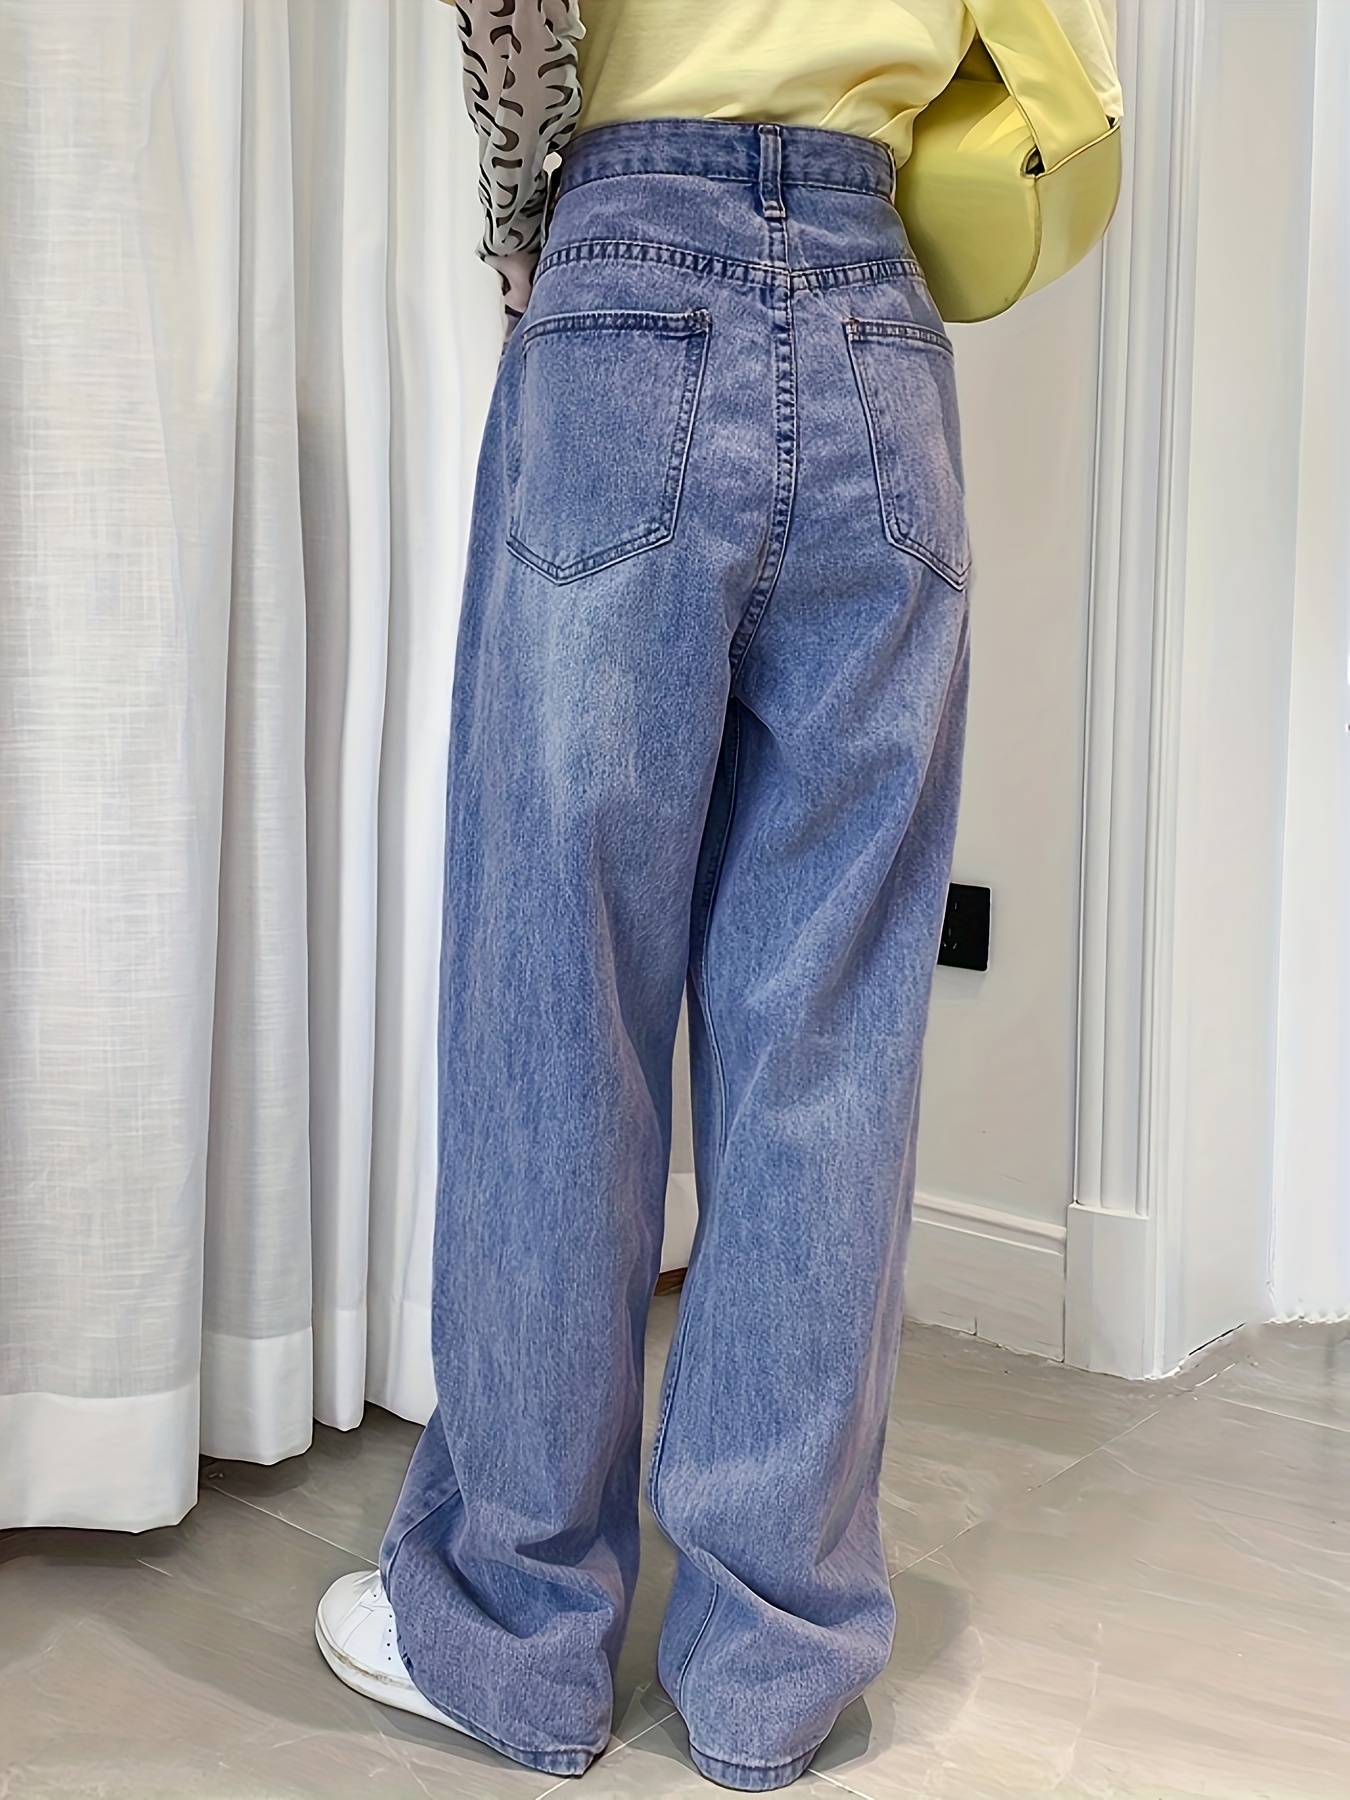 Womens Casual Jeans Denim Pants Vintage Pants Trousers with